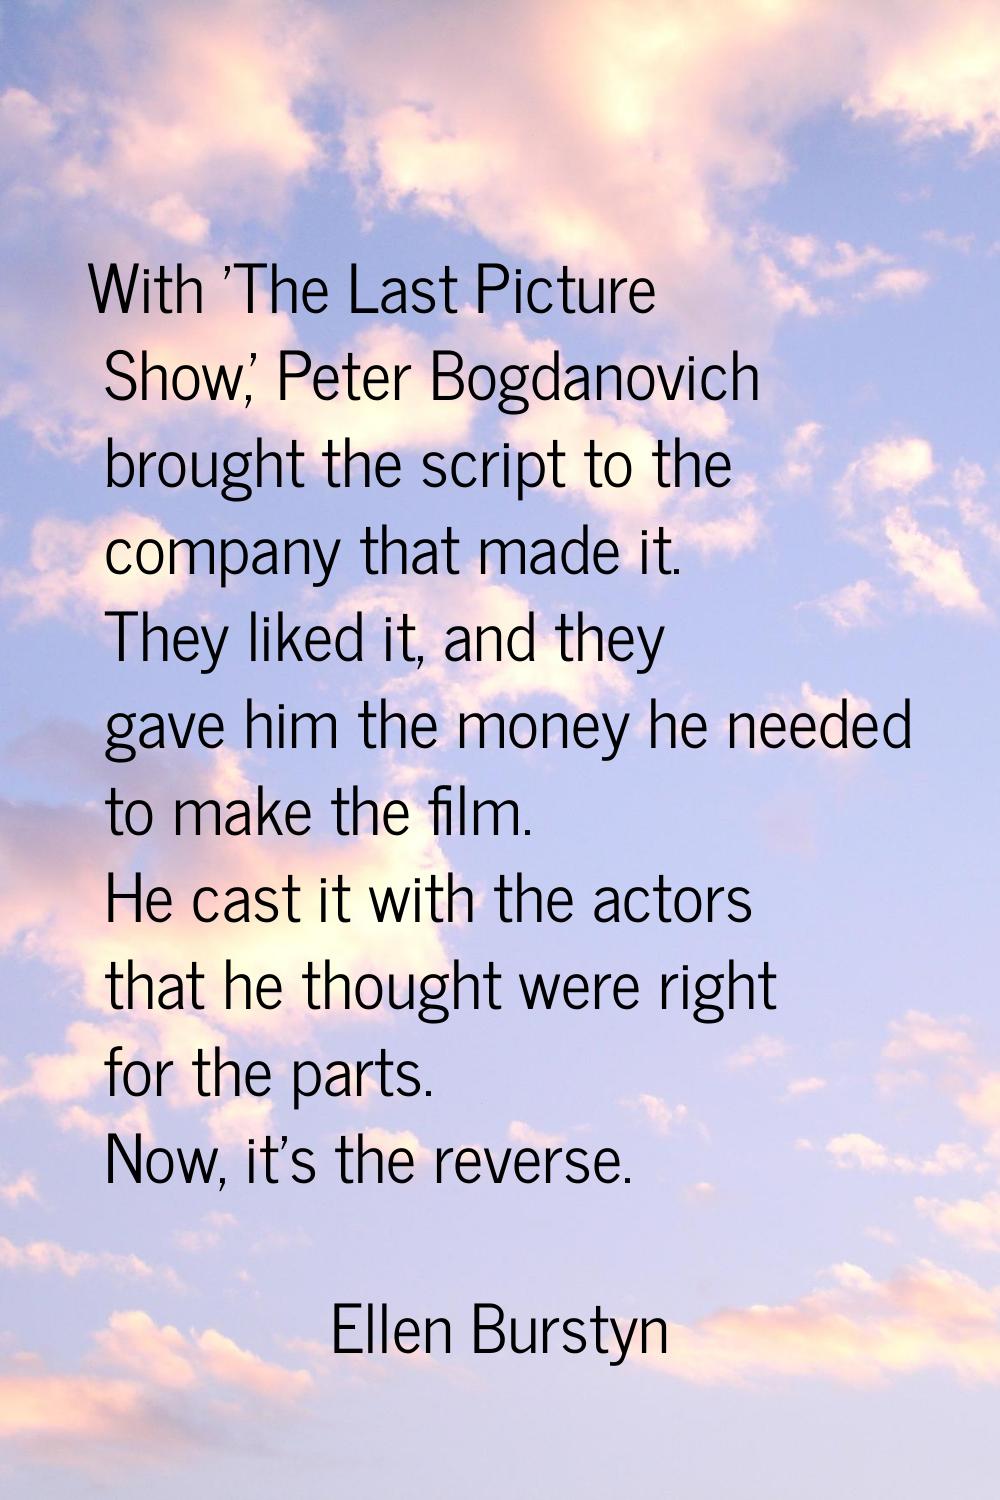 With 'The Last Picture Show,' Peter Bogdanovich brought the script to the company that made it. The